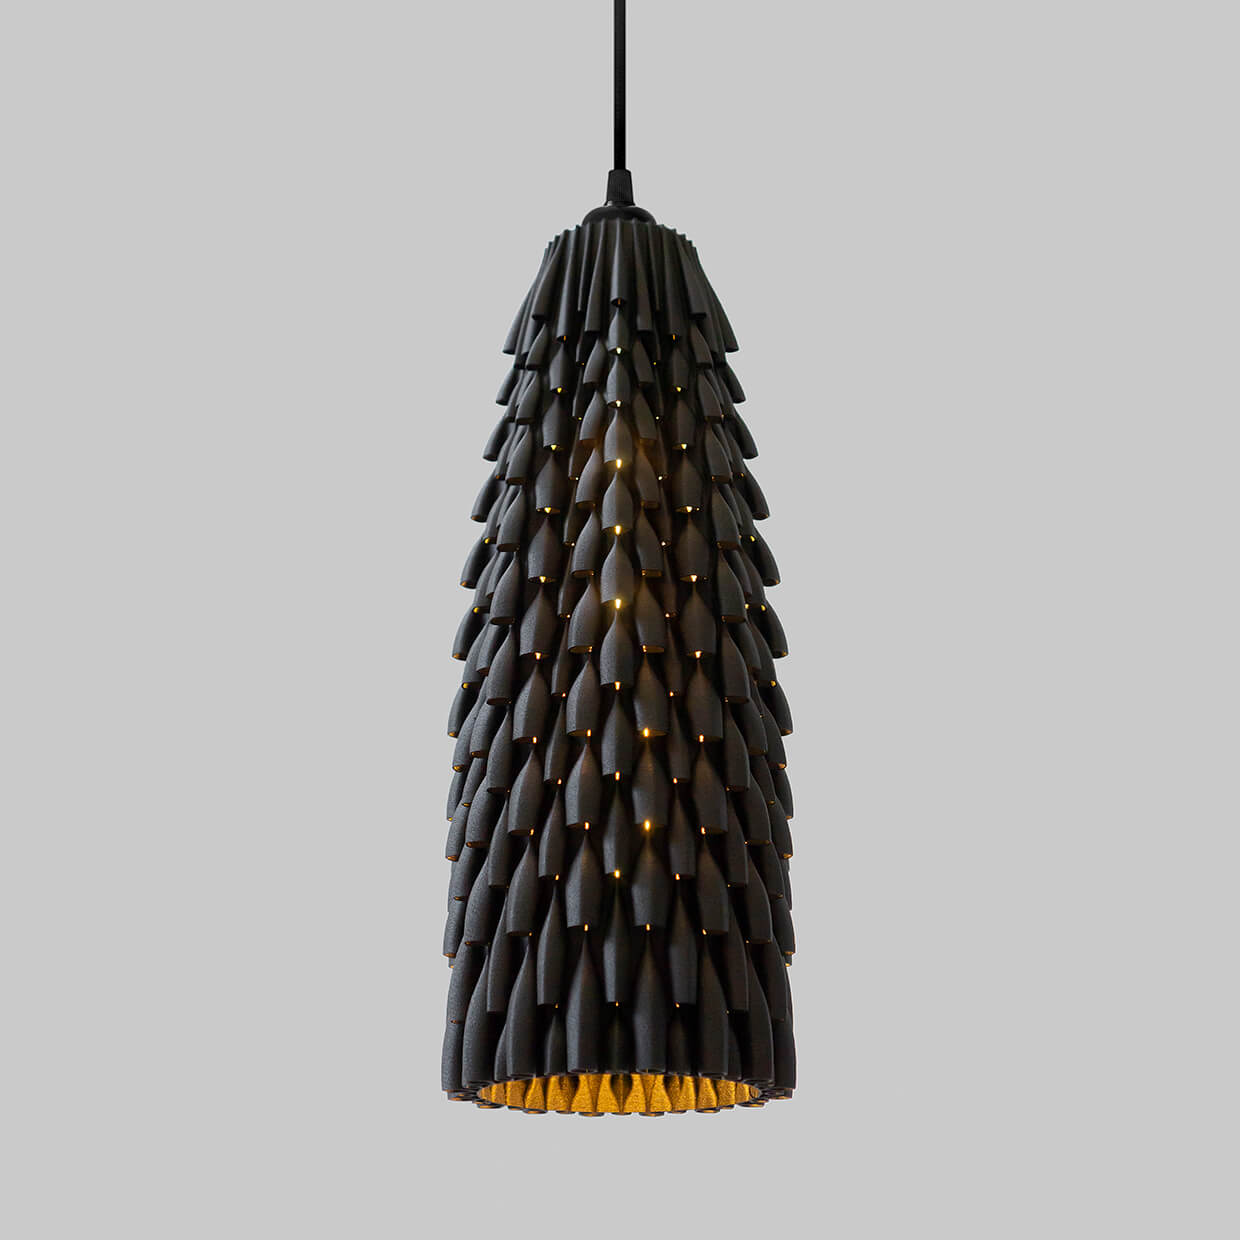 3d Printed Lampshade Armadillo Ebony size Large, light turned on. Made from composite material: ebony wood fiber and PLA, a renewable compound made of corn